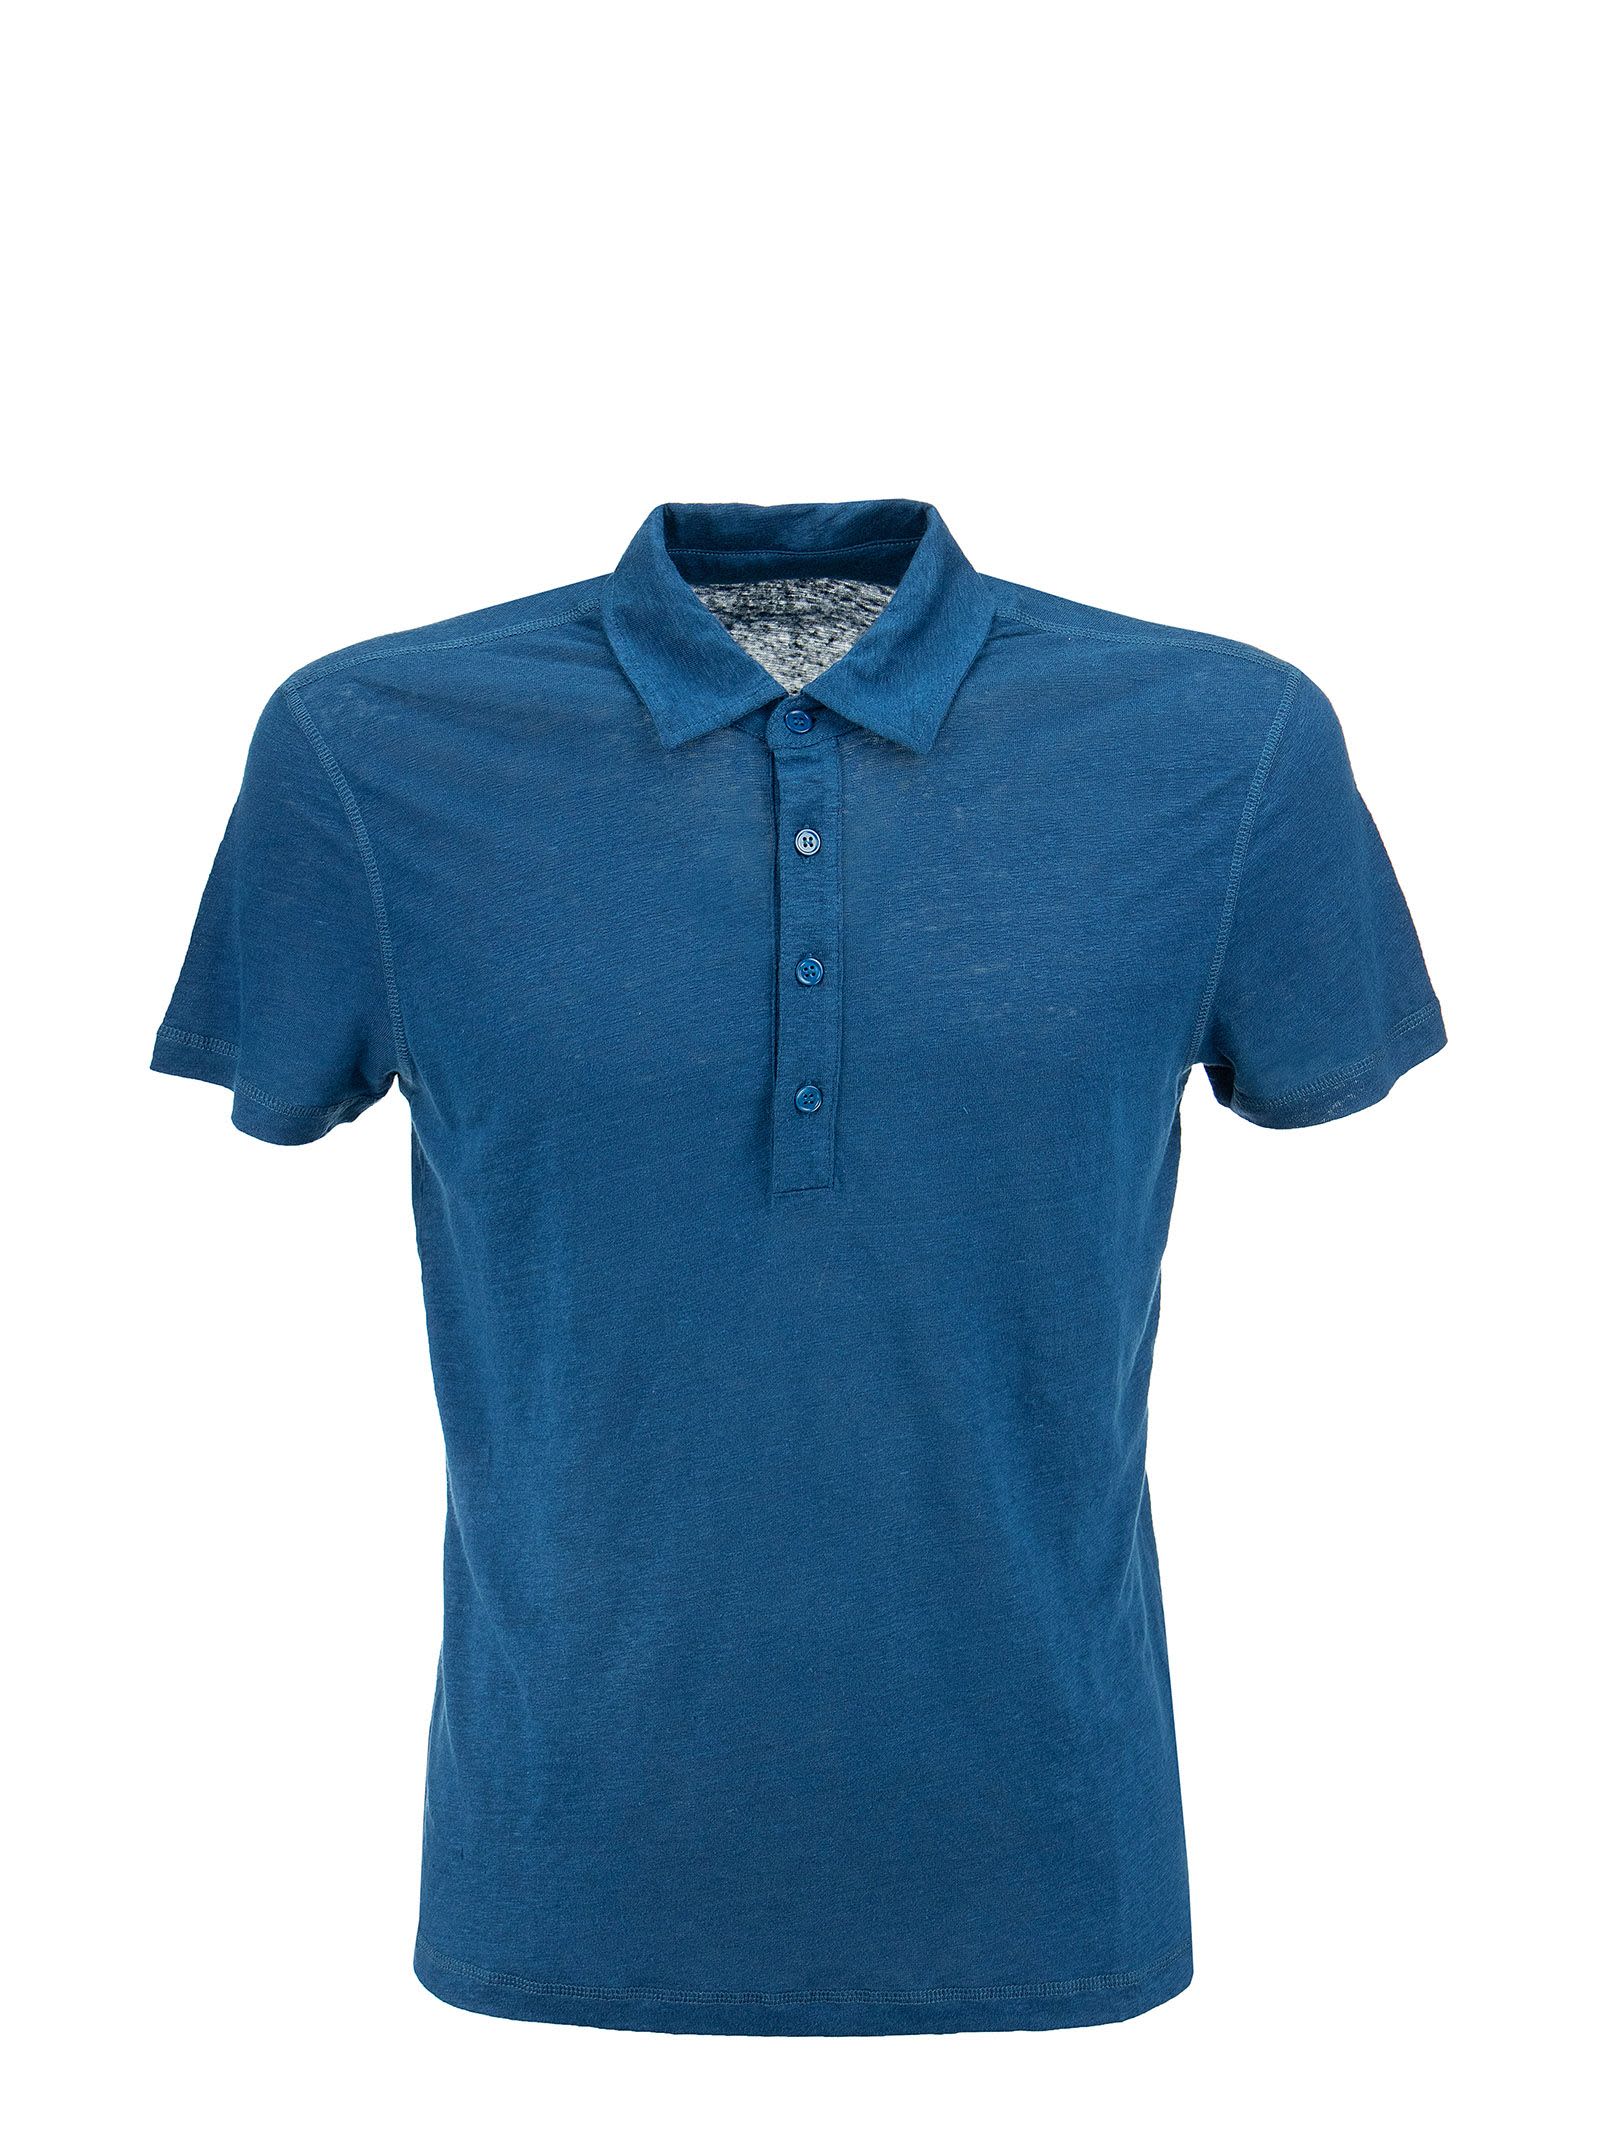 MAJESTIC LINEN POLO SHIRT WITH SHORT SLEEVES,M011 HPO009 334